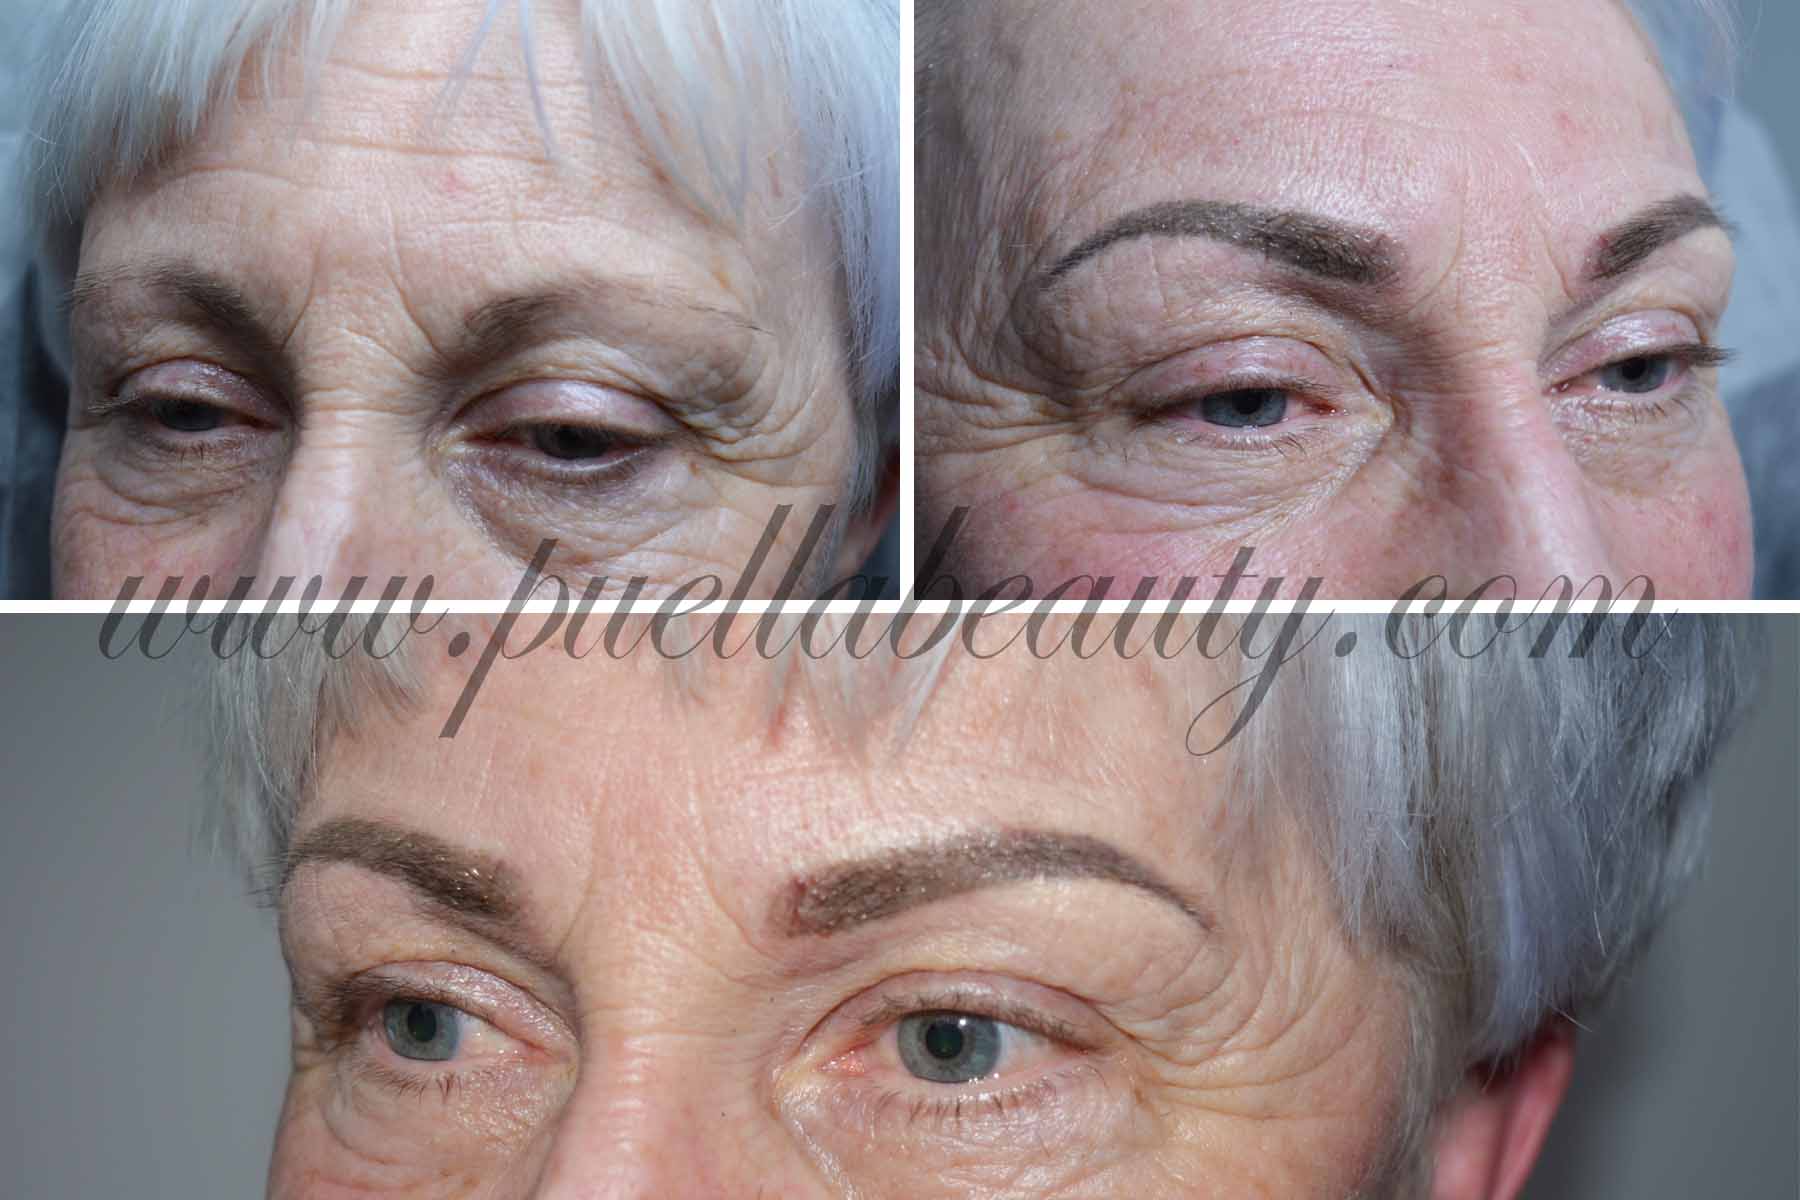 Eyebrows permanent makeup - before and after